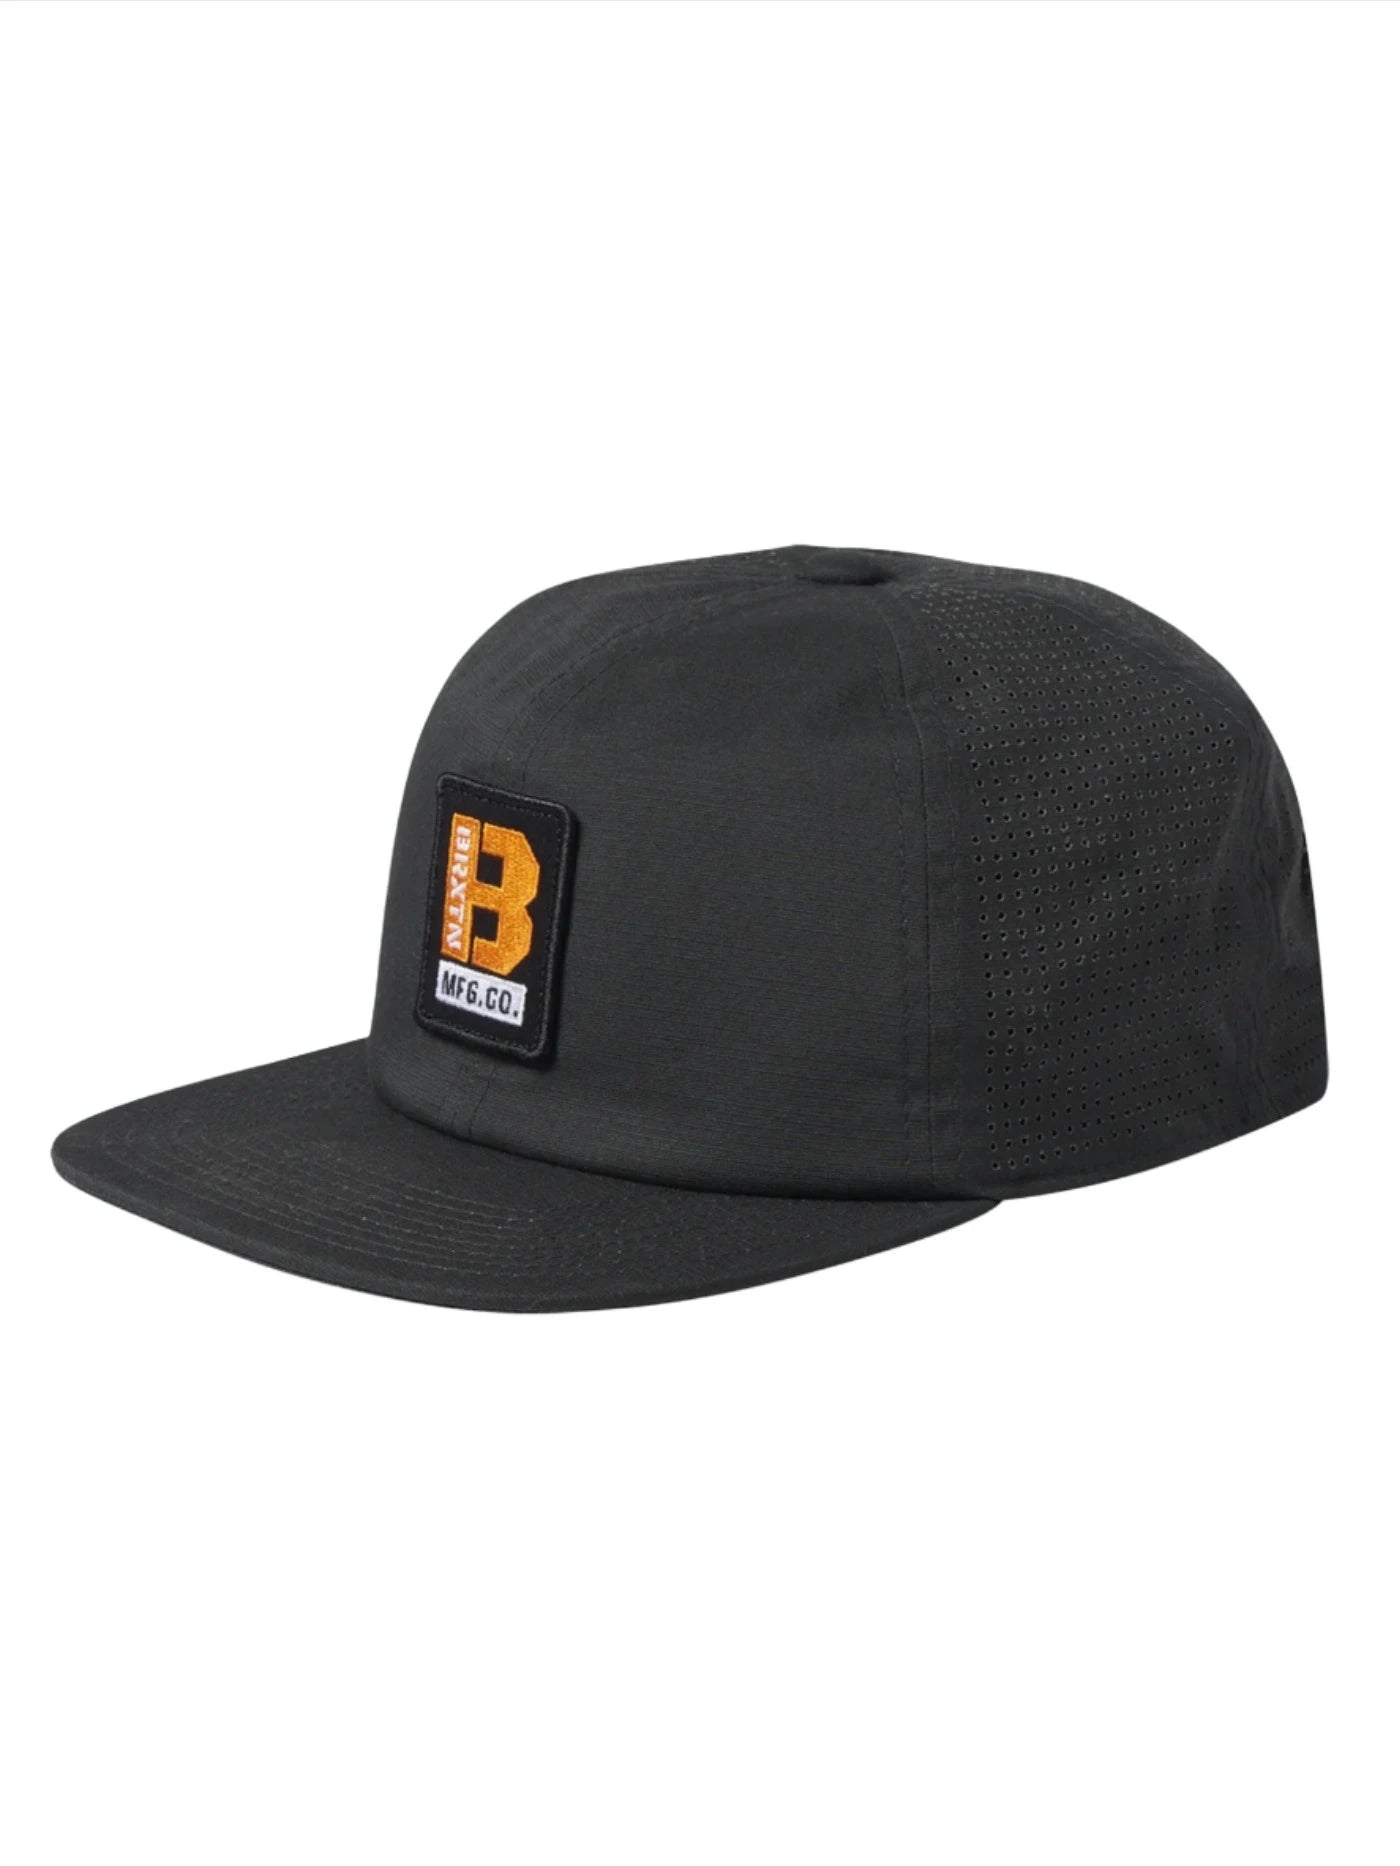 Mens Other Caps - 5 pannels / 3 Pannels and More – RVCA